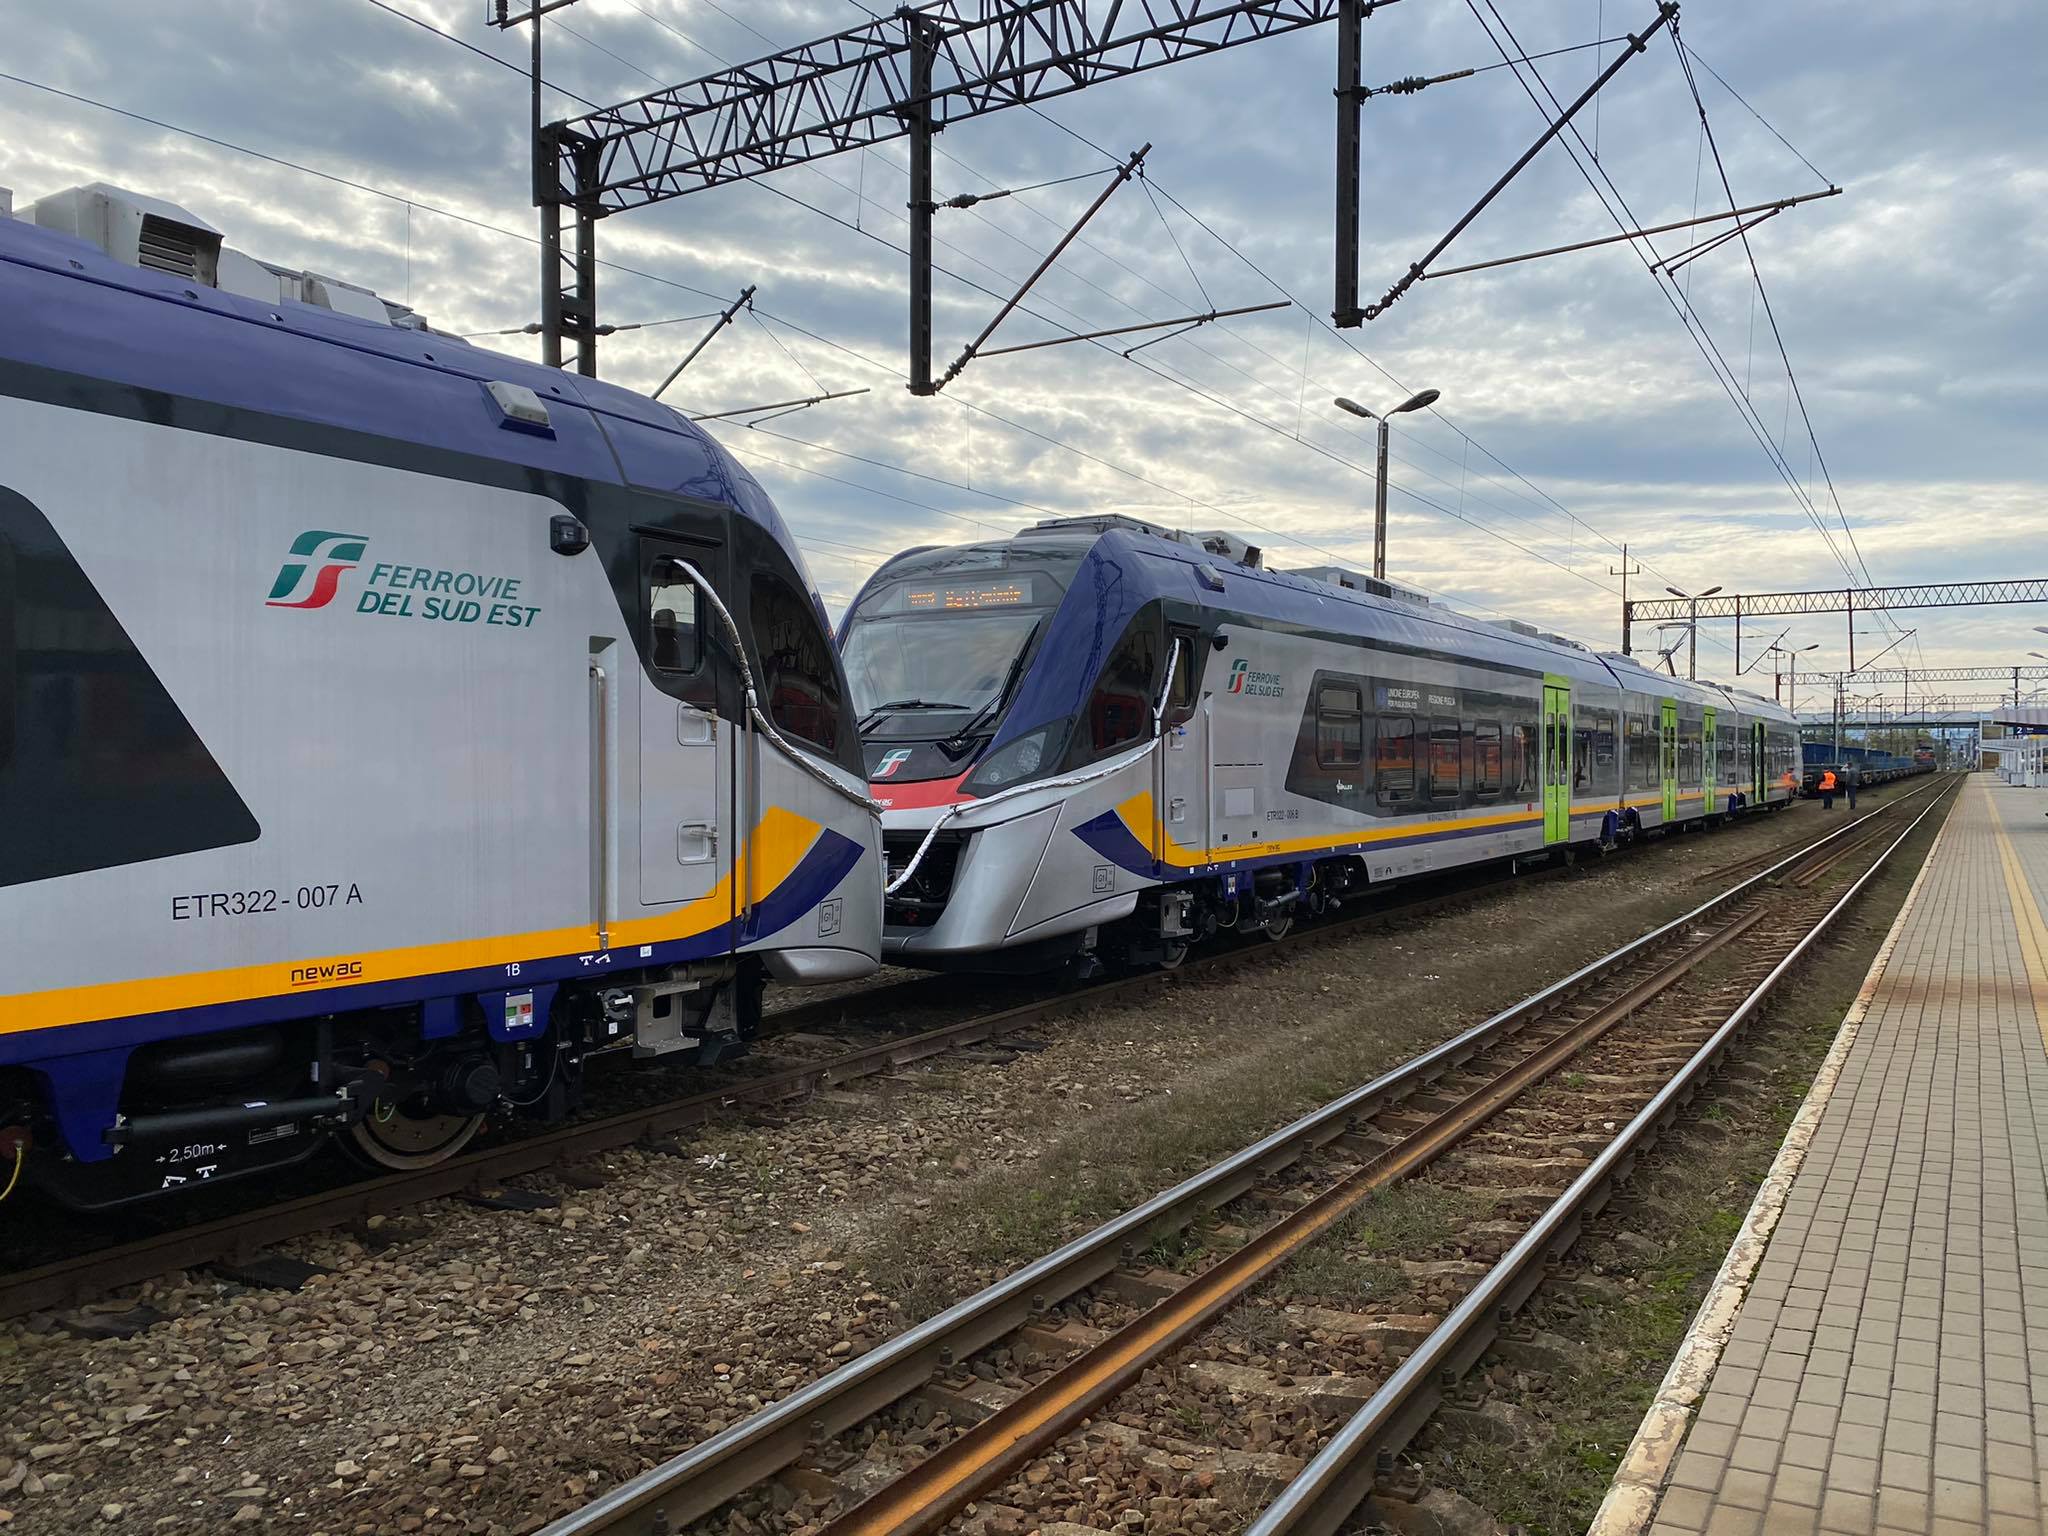 Another IMPULS 2 EMU on their way to Italy